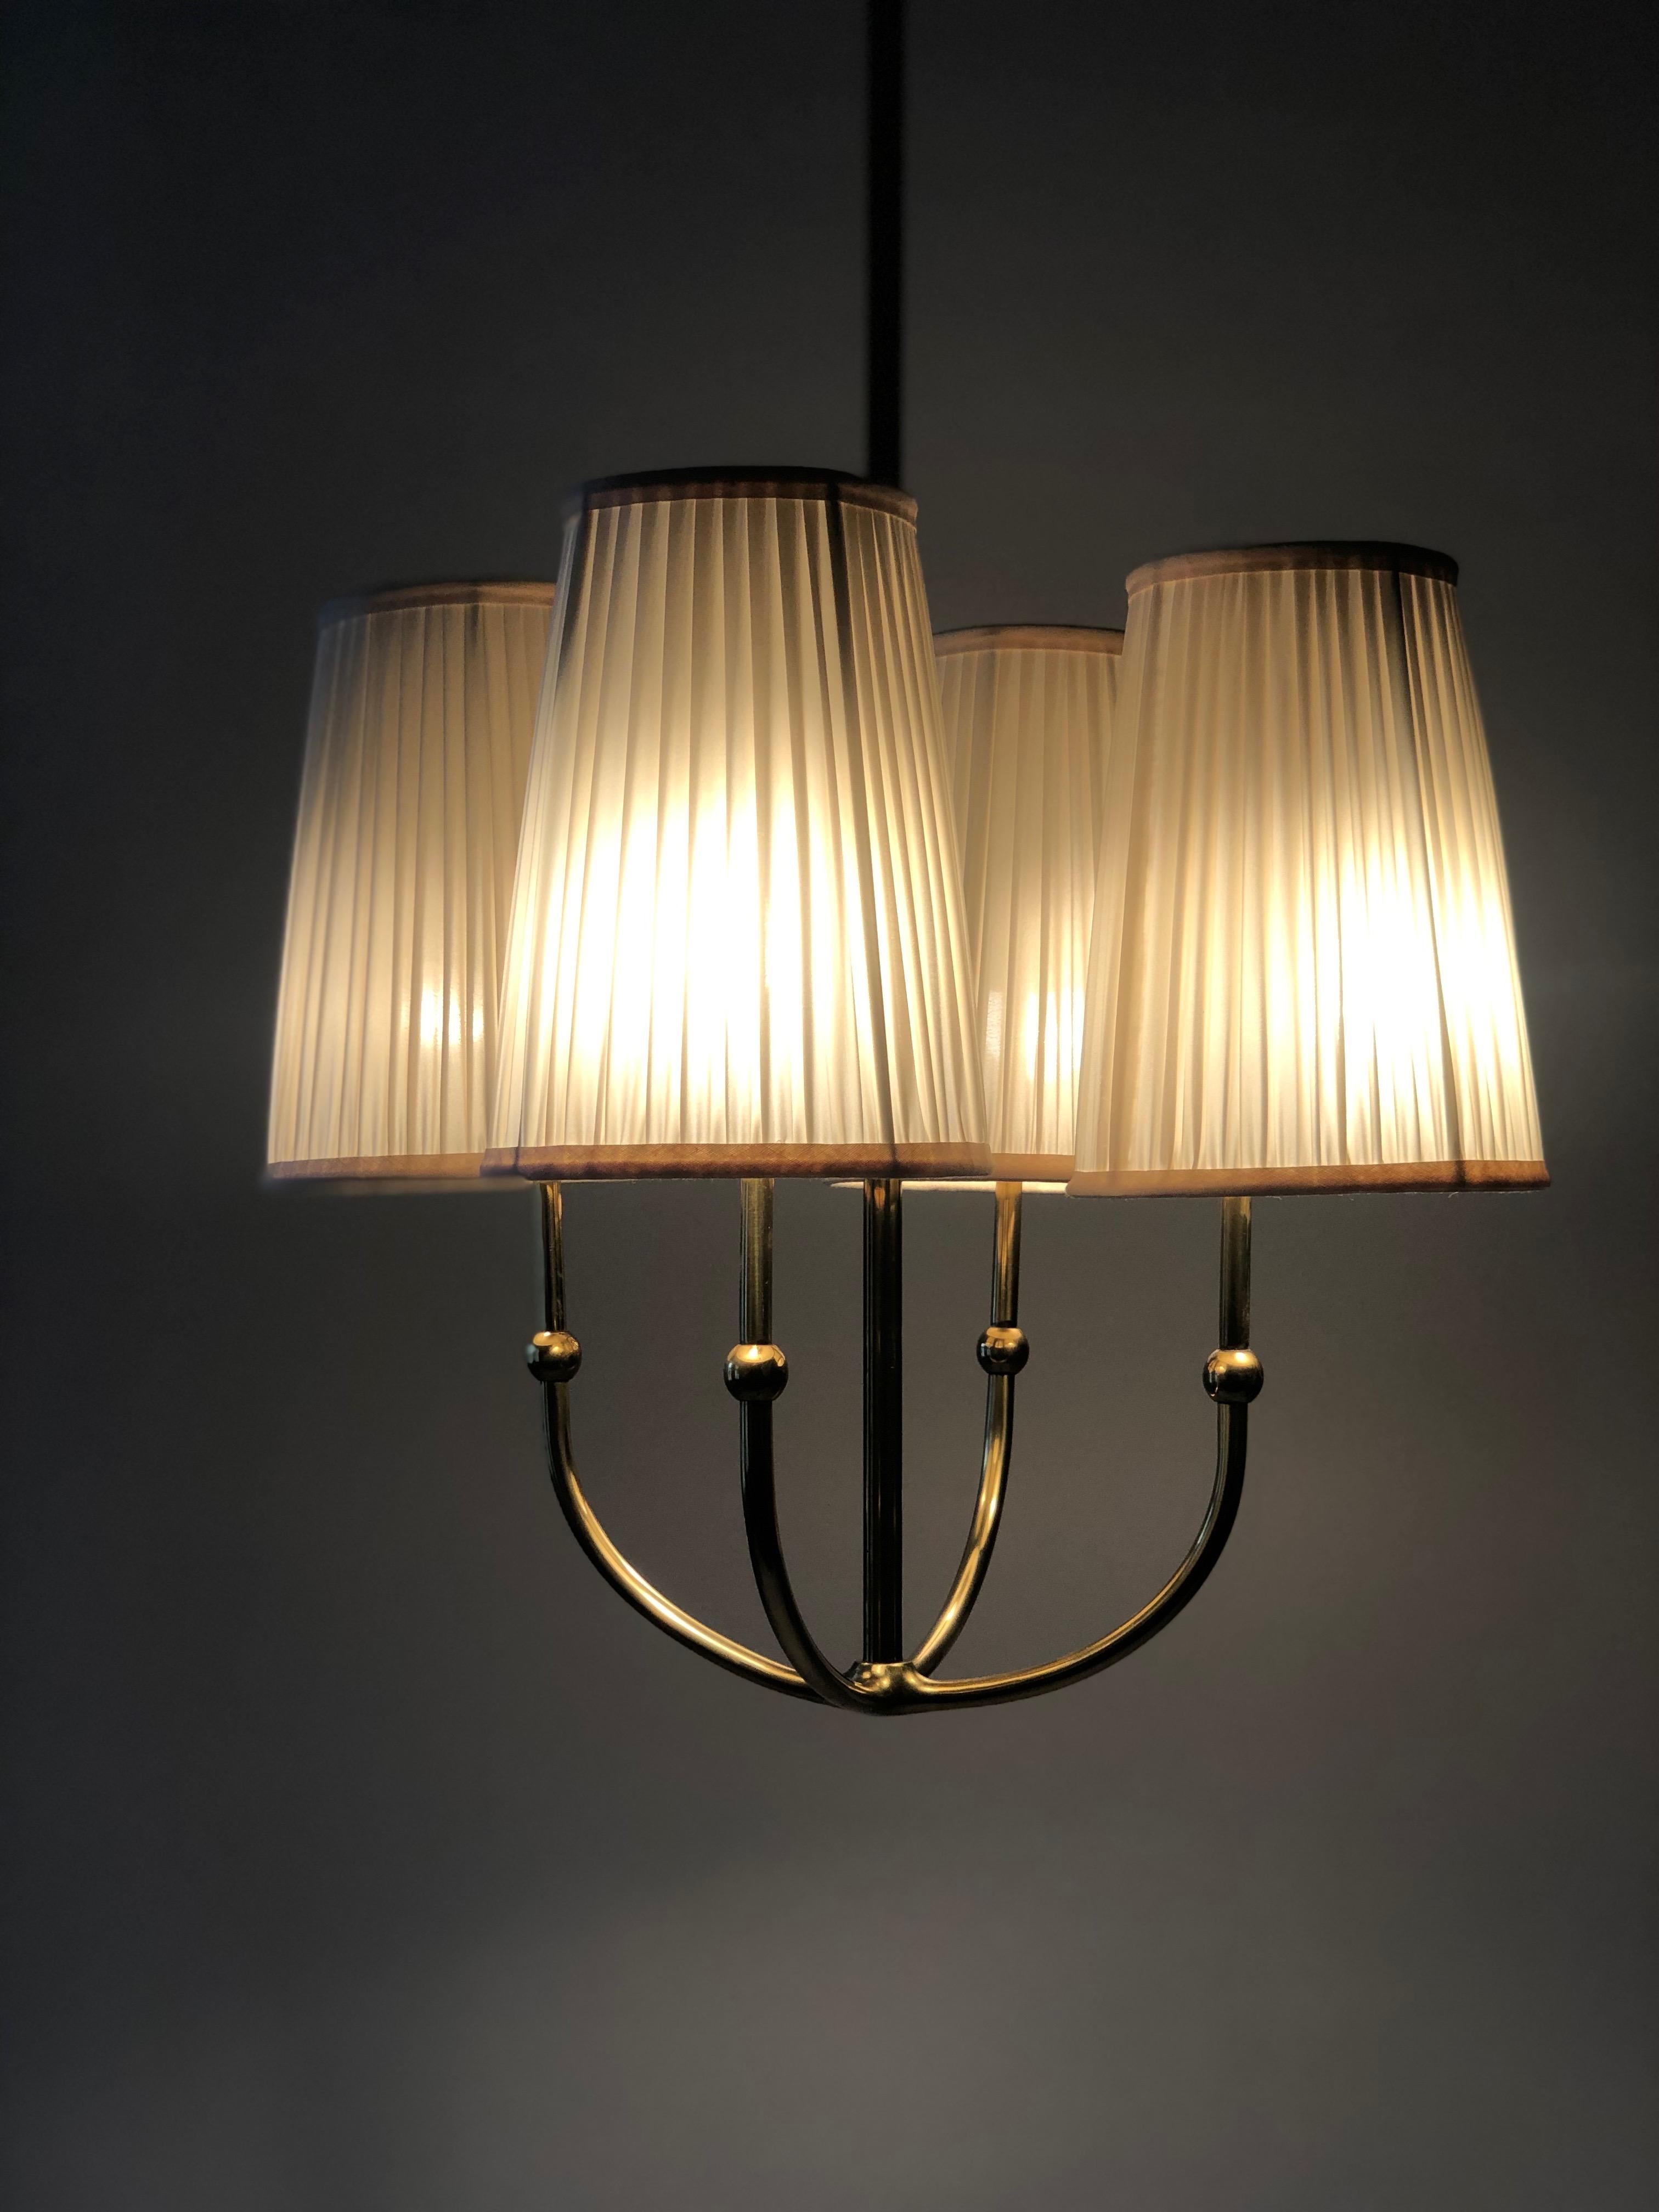 Mid-20th Century Four Arm Chandelier in Brass with Silk Shades , 1930's, Austria For Sale